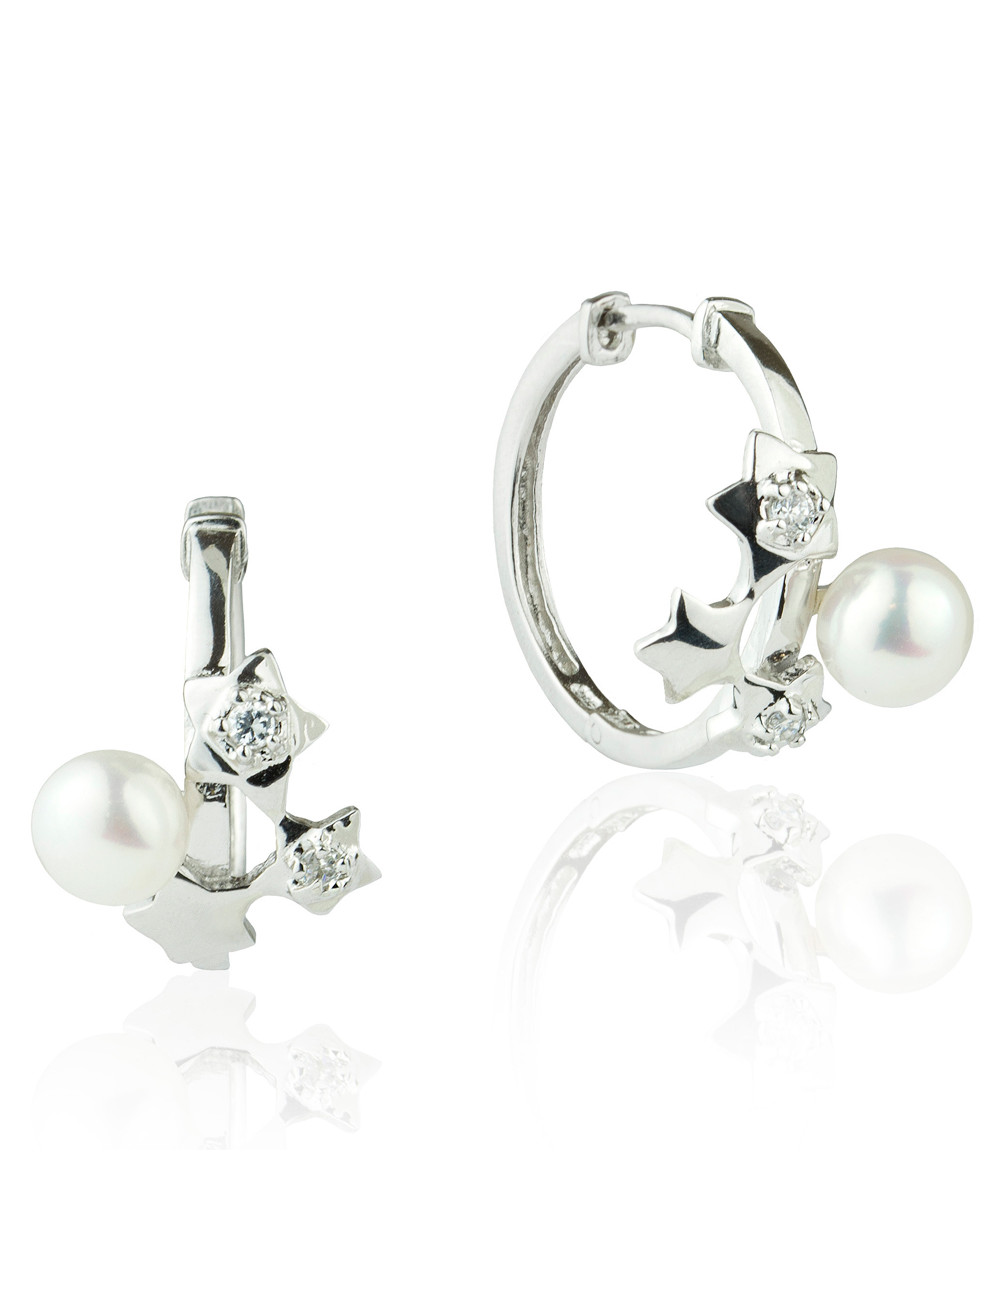 Circle earrings with three stars adorned with cubic zirconia and 3/4 round white pearl YA704S